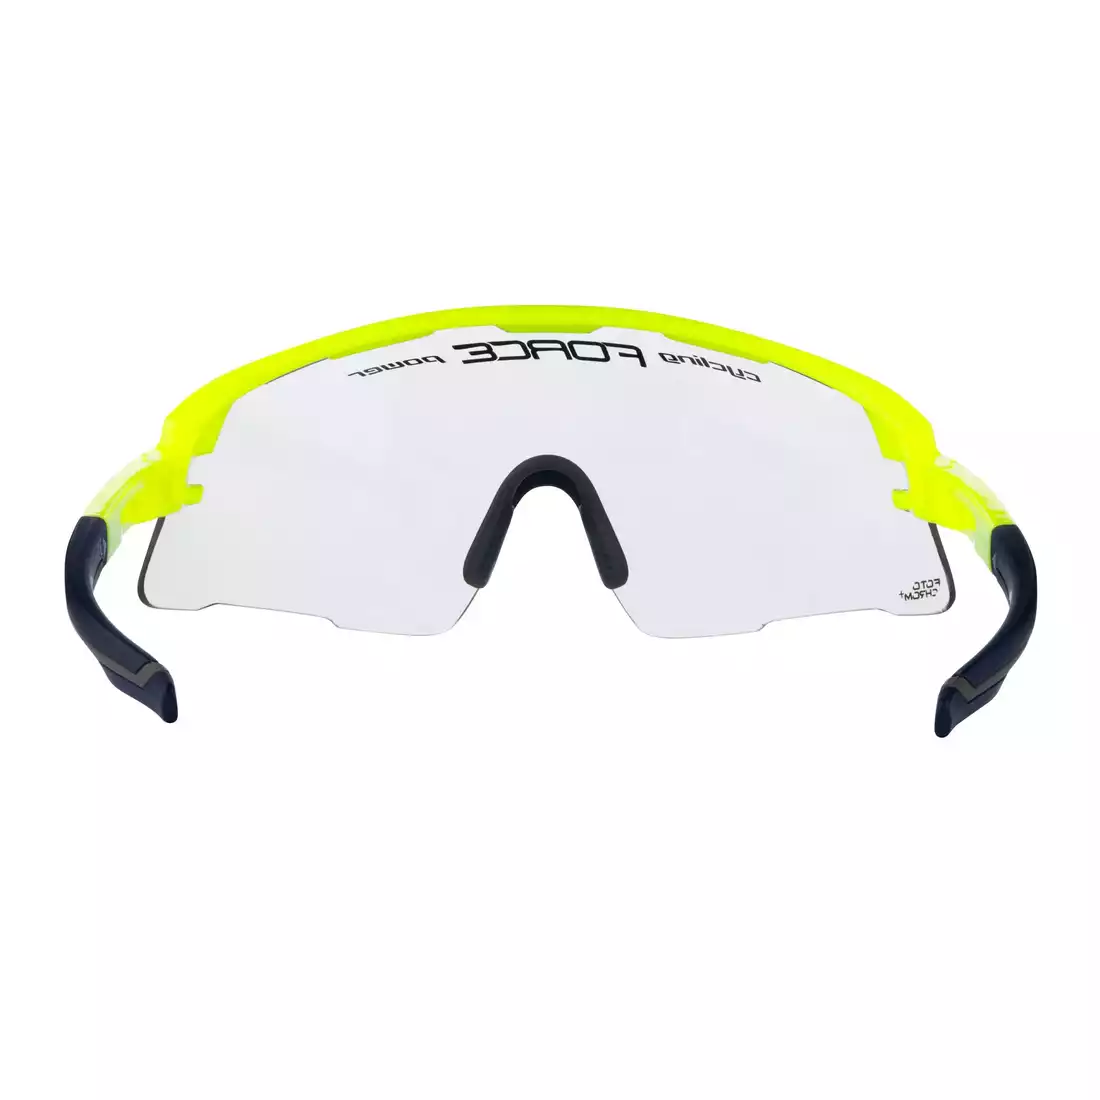 FORCE AMBIENT Photochromic sport glasses, fluo-black